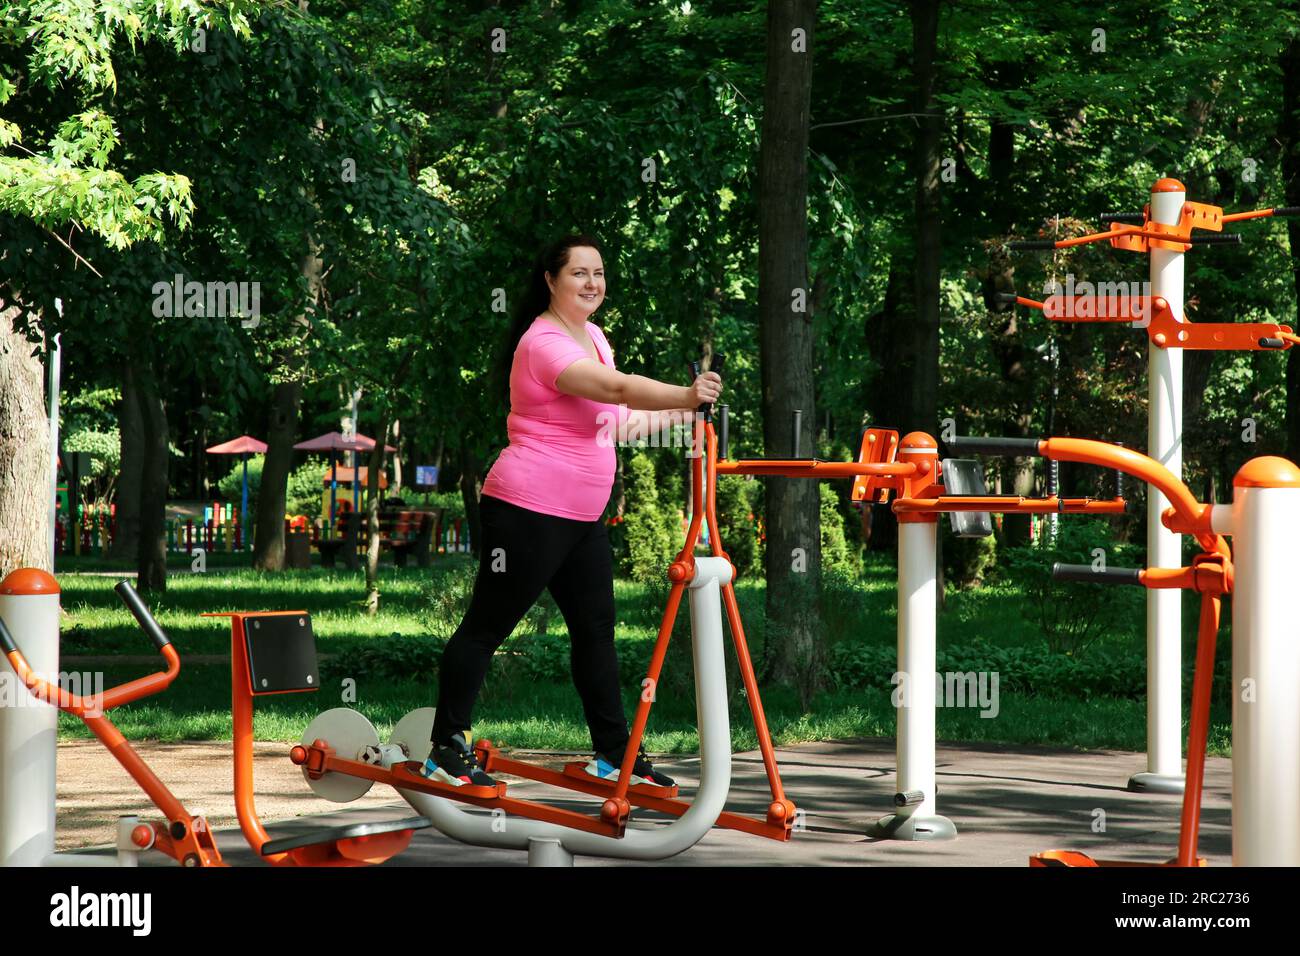 Overweight woman doing exercise with air walker in park Stock Photo